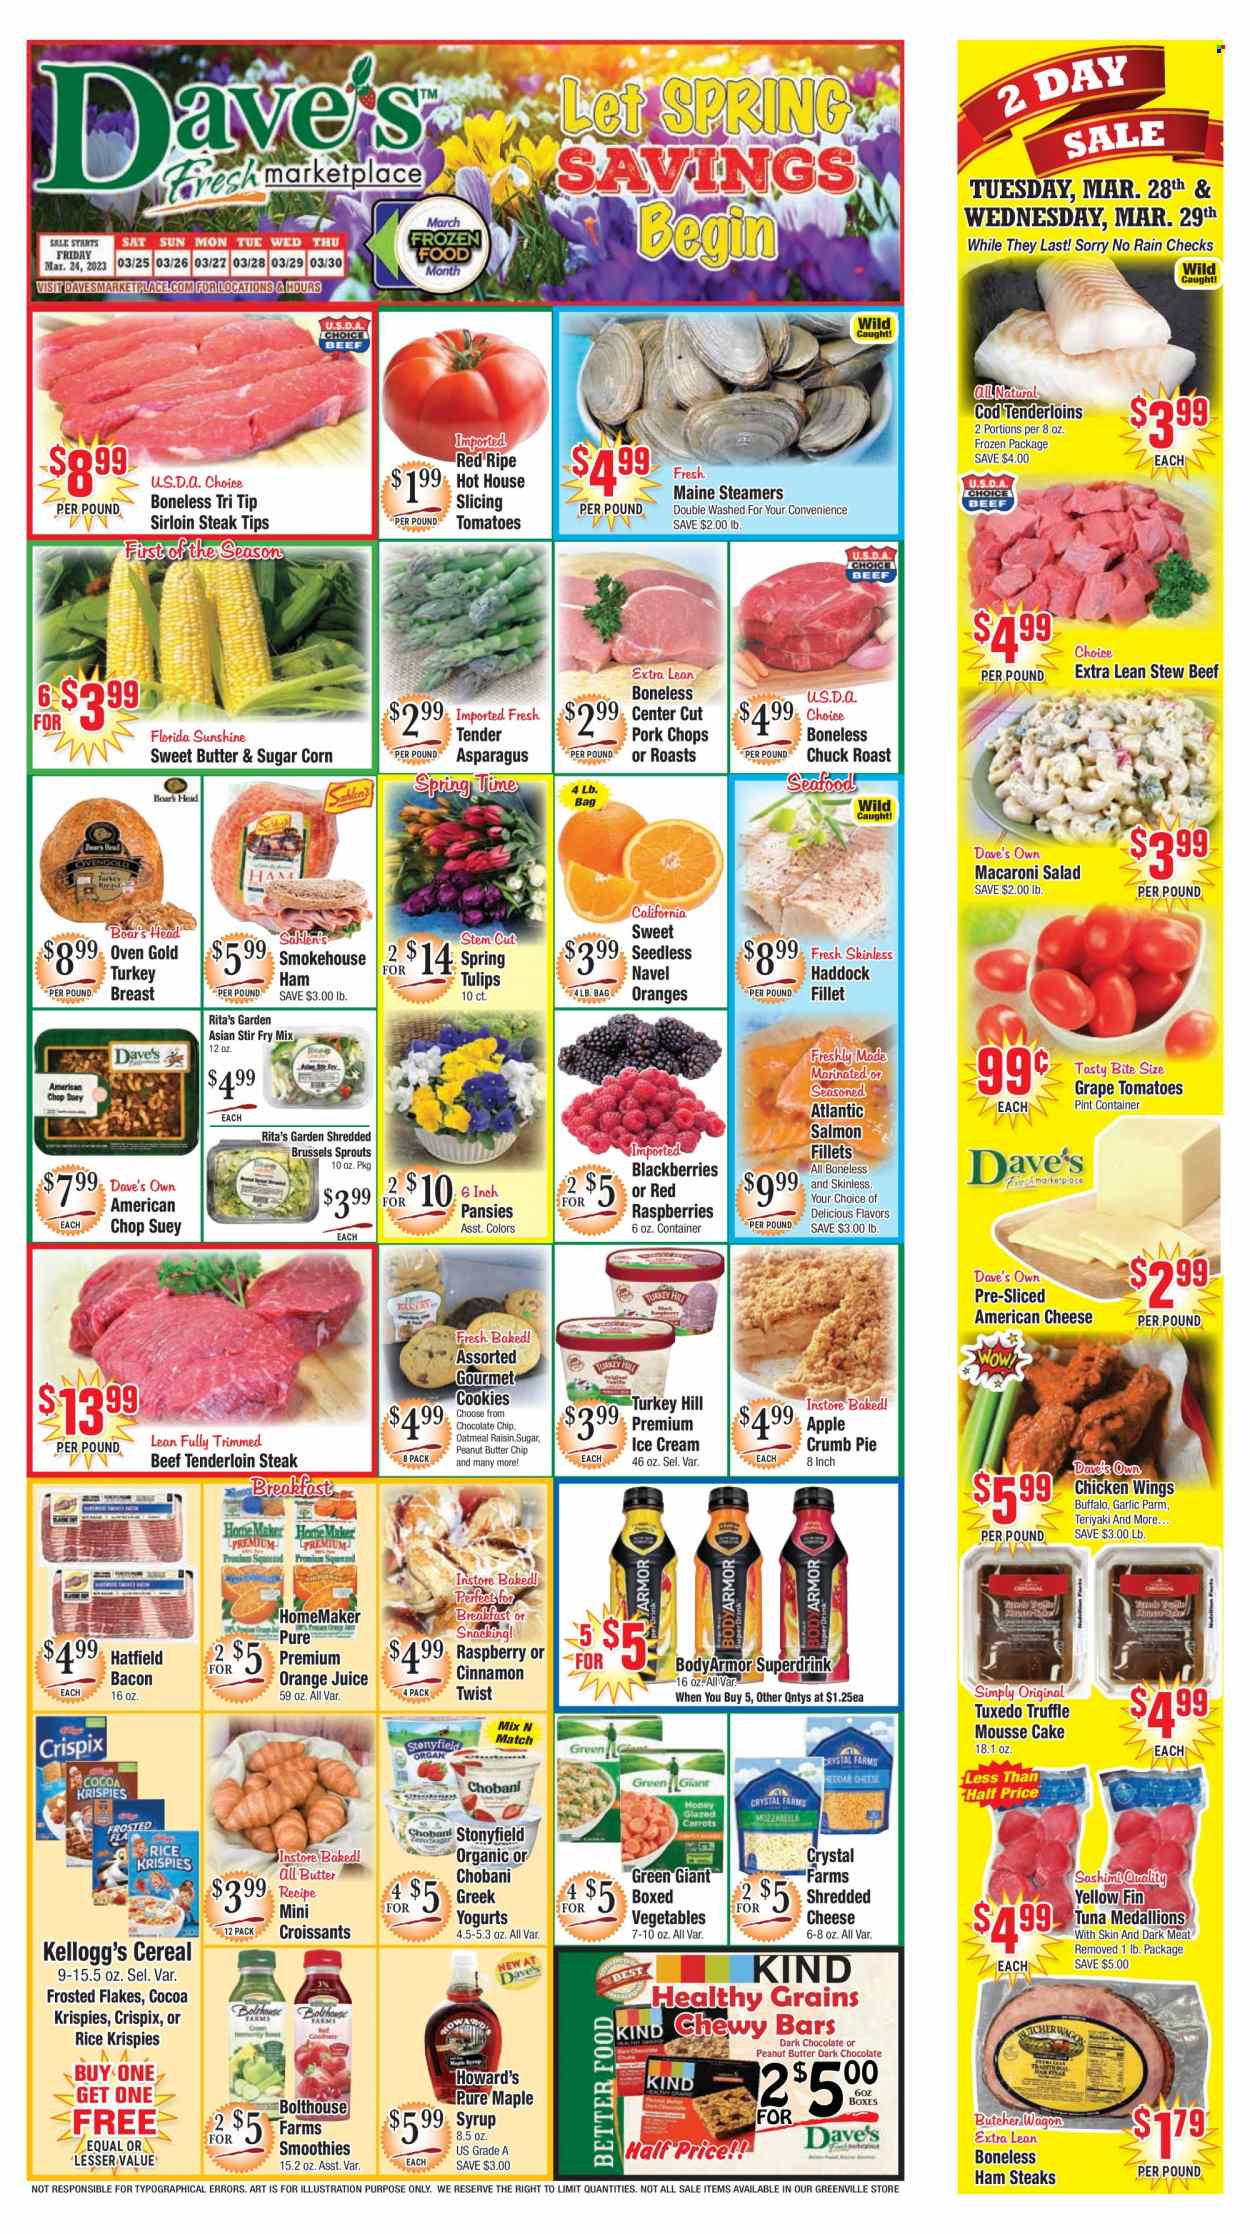 thumbnail - Dave's Fresh Marketplace Flyer - 03/24/2023 - 03/30/2023 - Sales products - cake, croissant, corn, garlic, tomatoes, brussel sprouts, blackberries, cod, salmon, salmon fillet, tuna, haddock, seafood, roast, bacon, ham, smoked ham, macaroni salad, ham steaks, american cheese, shredded cheese, Chobani, Sunshine, ice cream, chicken wings, cookies, chocolate chips, truffles, Kellogg's, dark chocolate, cocoa, oatmeal, cereals, Rice Krispies, Frosted Flakes, cinnamon, maple syrup, peanut butter, syrup, orange juice, juice, smoothie, turkey breast, chicken, beef meat, beef sirloin, steak, beef tenderloin, sirloin steak, chuck roast, pork chops, pork meat, tulip, navel oranges. Page 1.